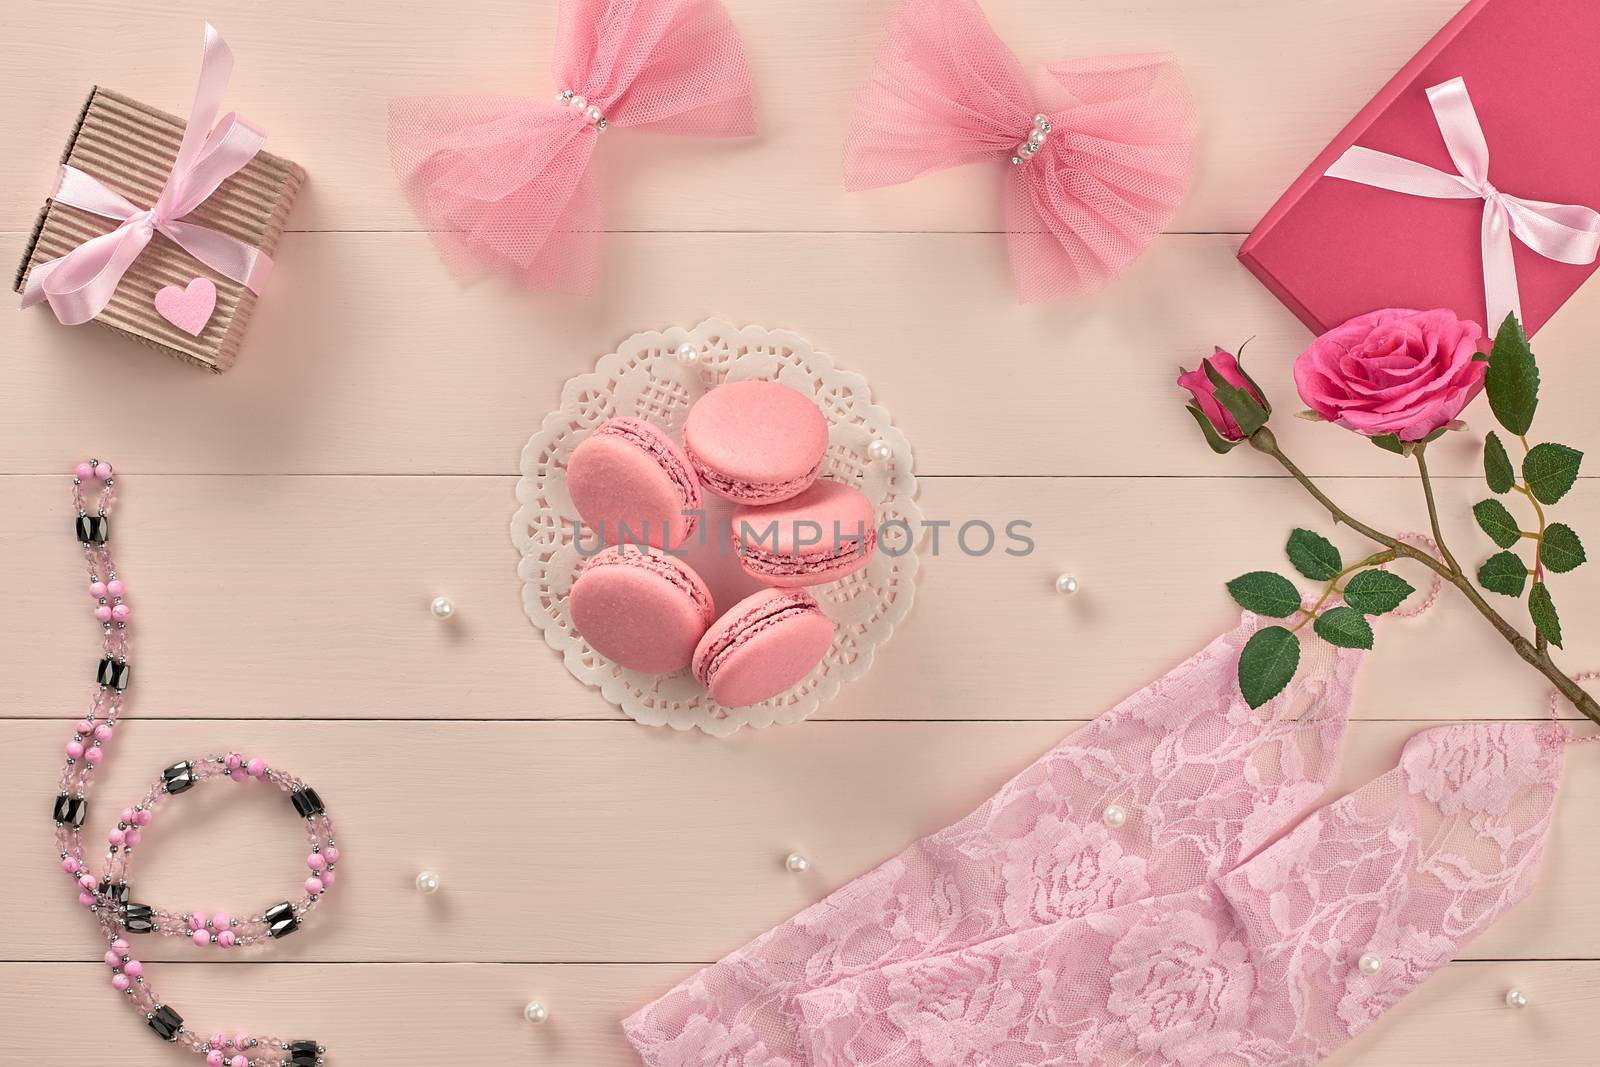 Overhead woman essentials fashion wedding accessories set. Lace gloves, macarons, gift boxes, necklace and roses. Creative bride set, vanilla wooden background. Romantic modern, still life. Top view